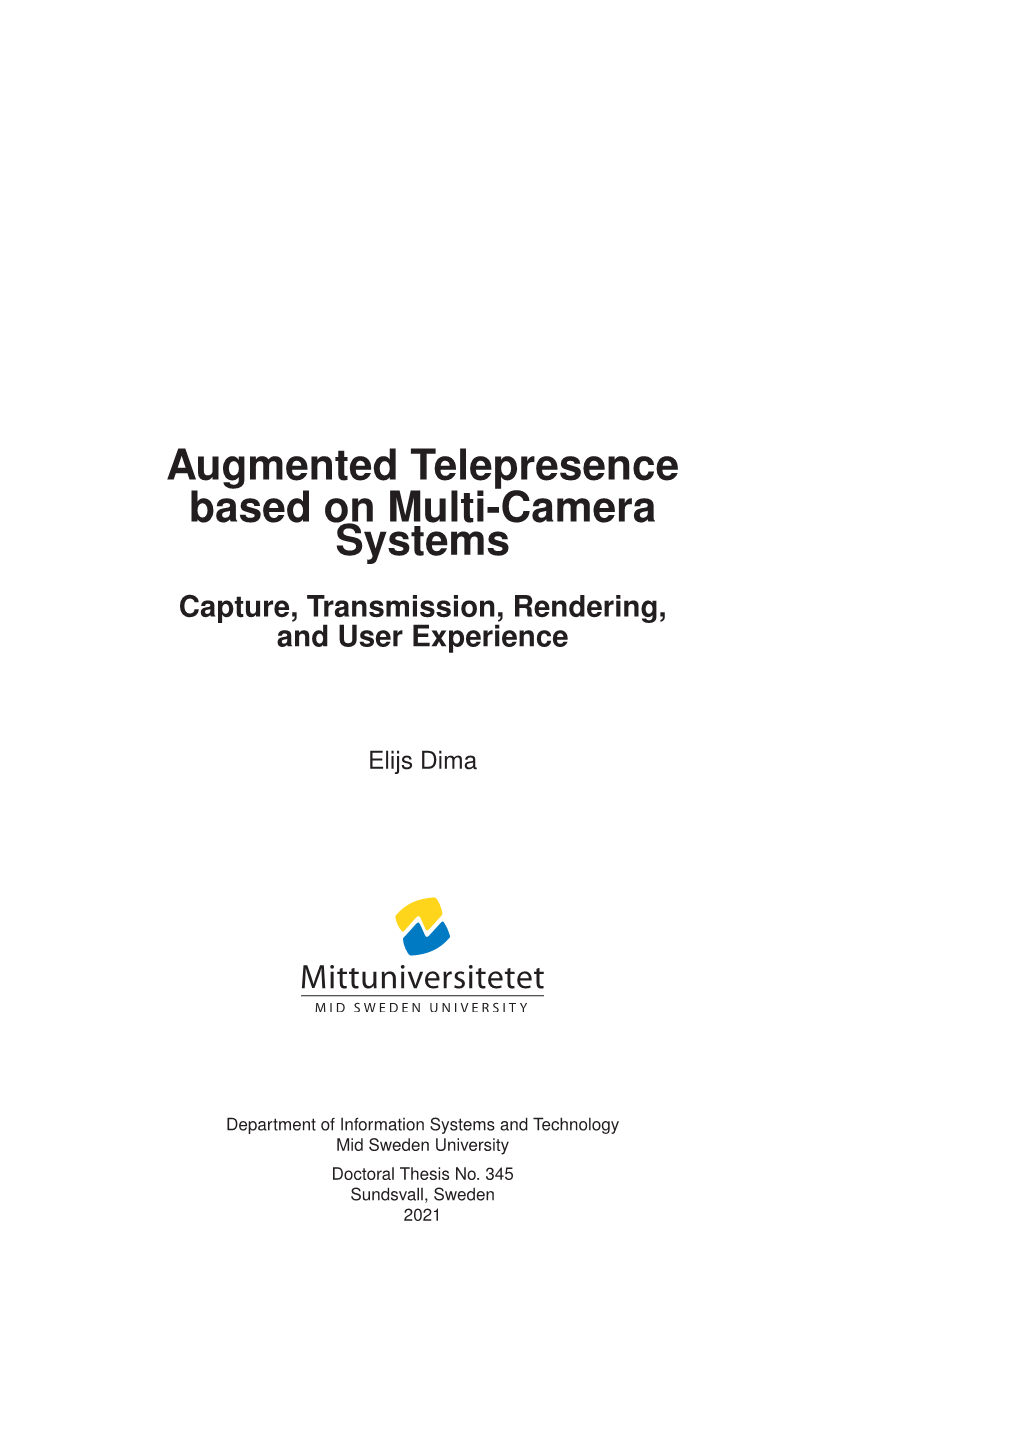 Augmented Telepresence Based on Multi-Camera Systems